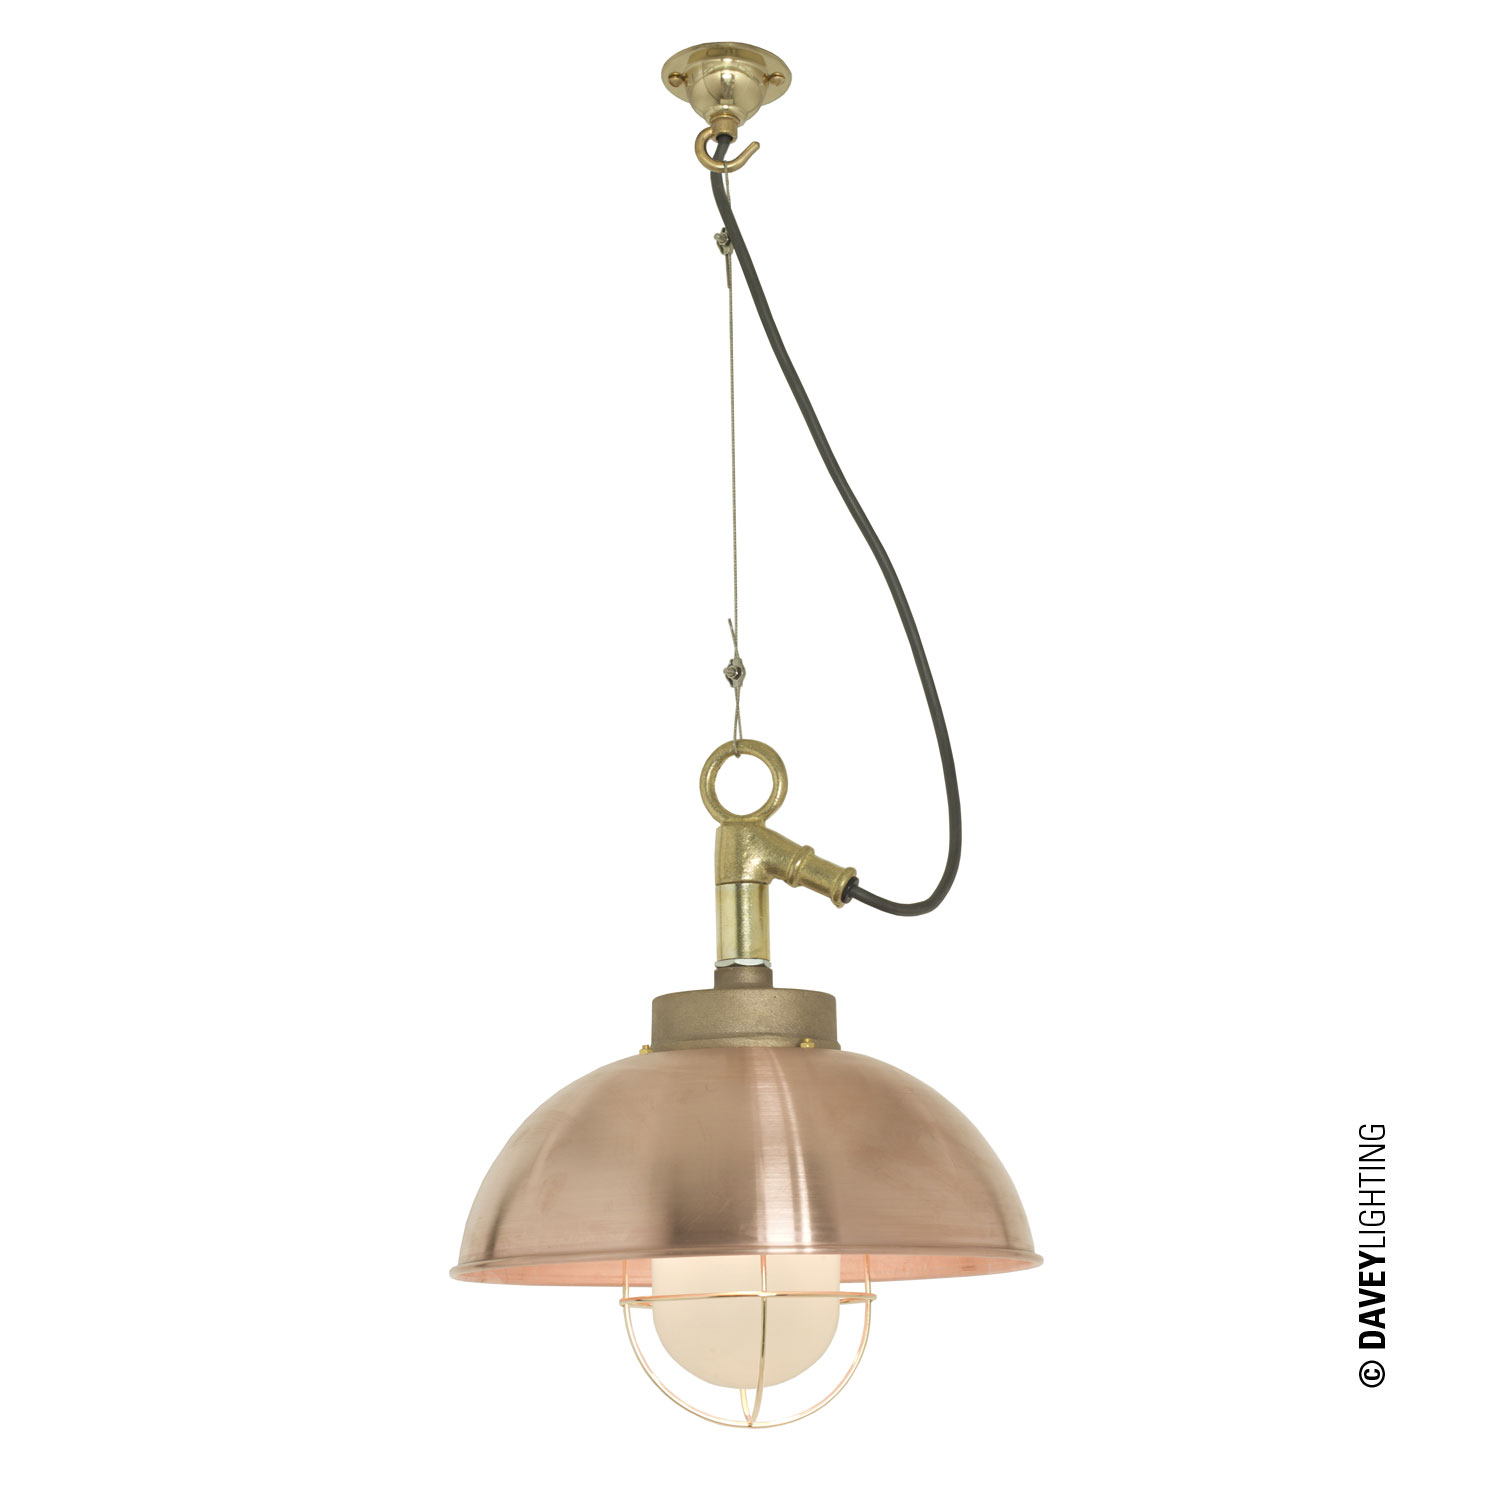 Shipyard Pendant, Copper, Frosted Glass